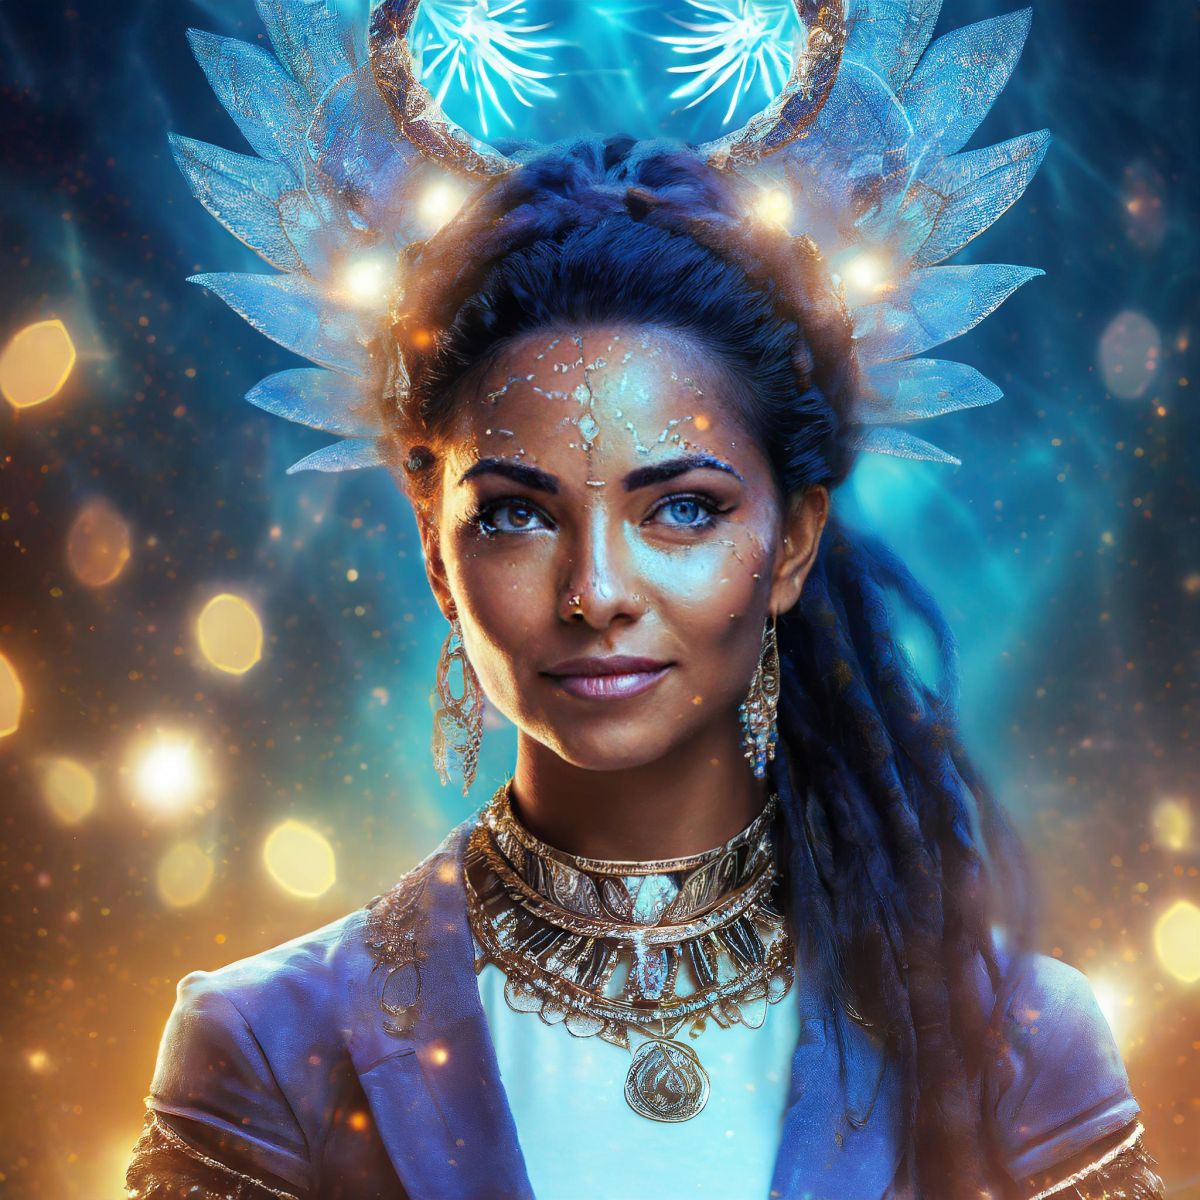 Clotho Moirai: The Goddess of Life. A portrait of her demonstrating her love and power. Image generated by Adobe Firefly.